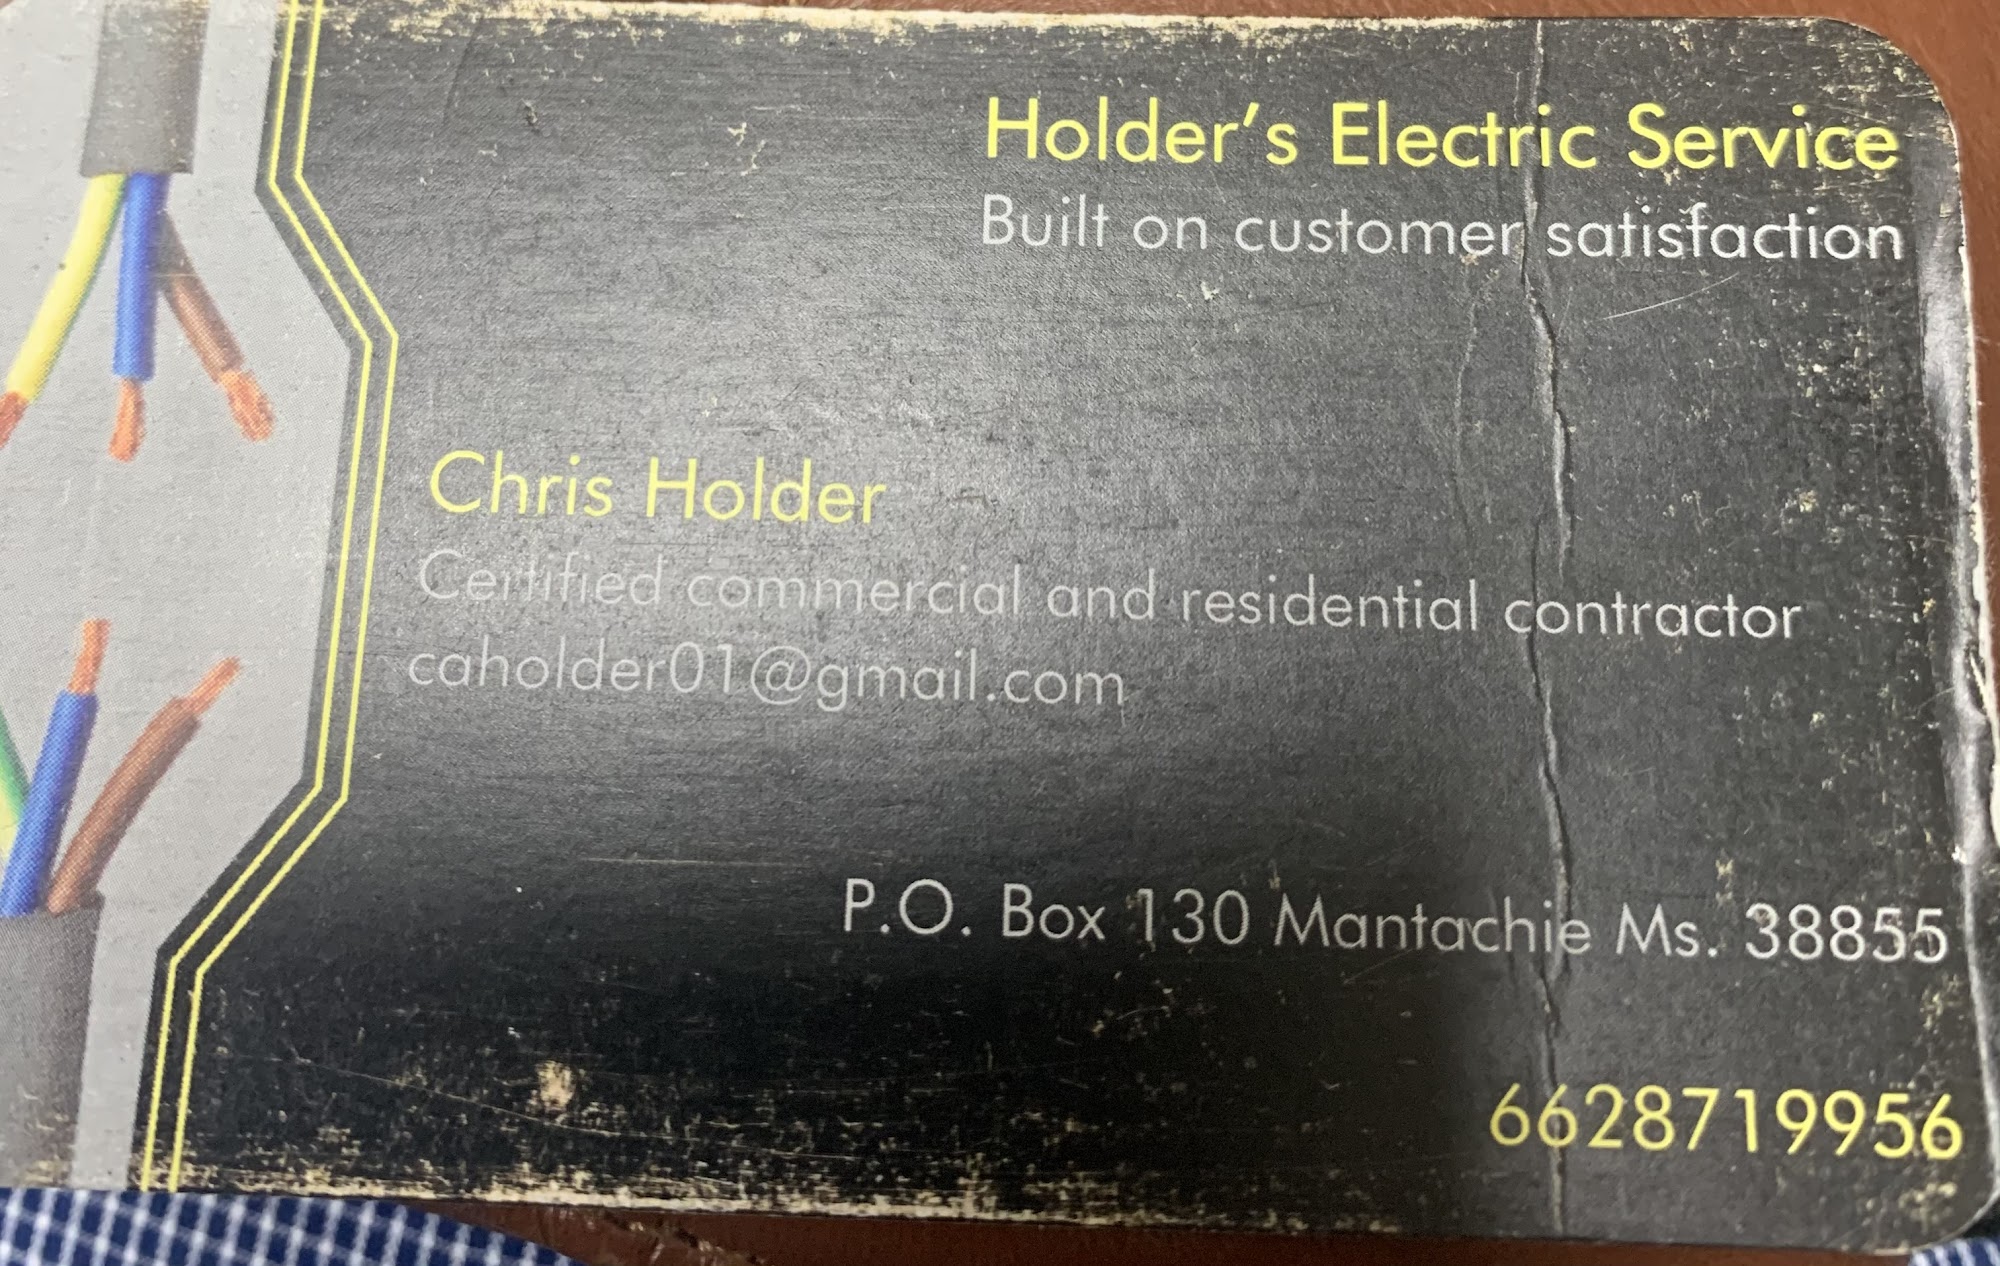 Holders Electric 3033 MS-371, Mantachie Mississippi 38855